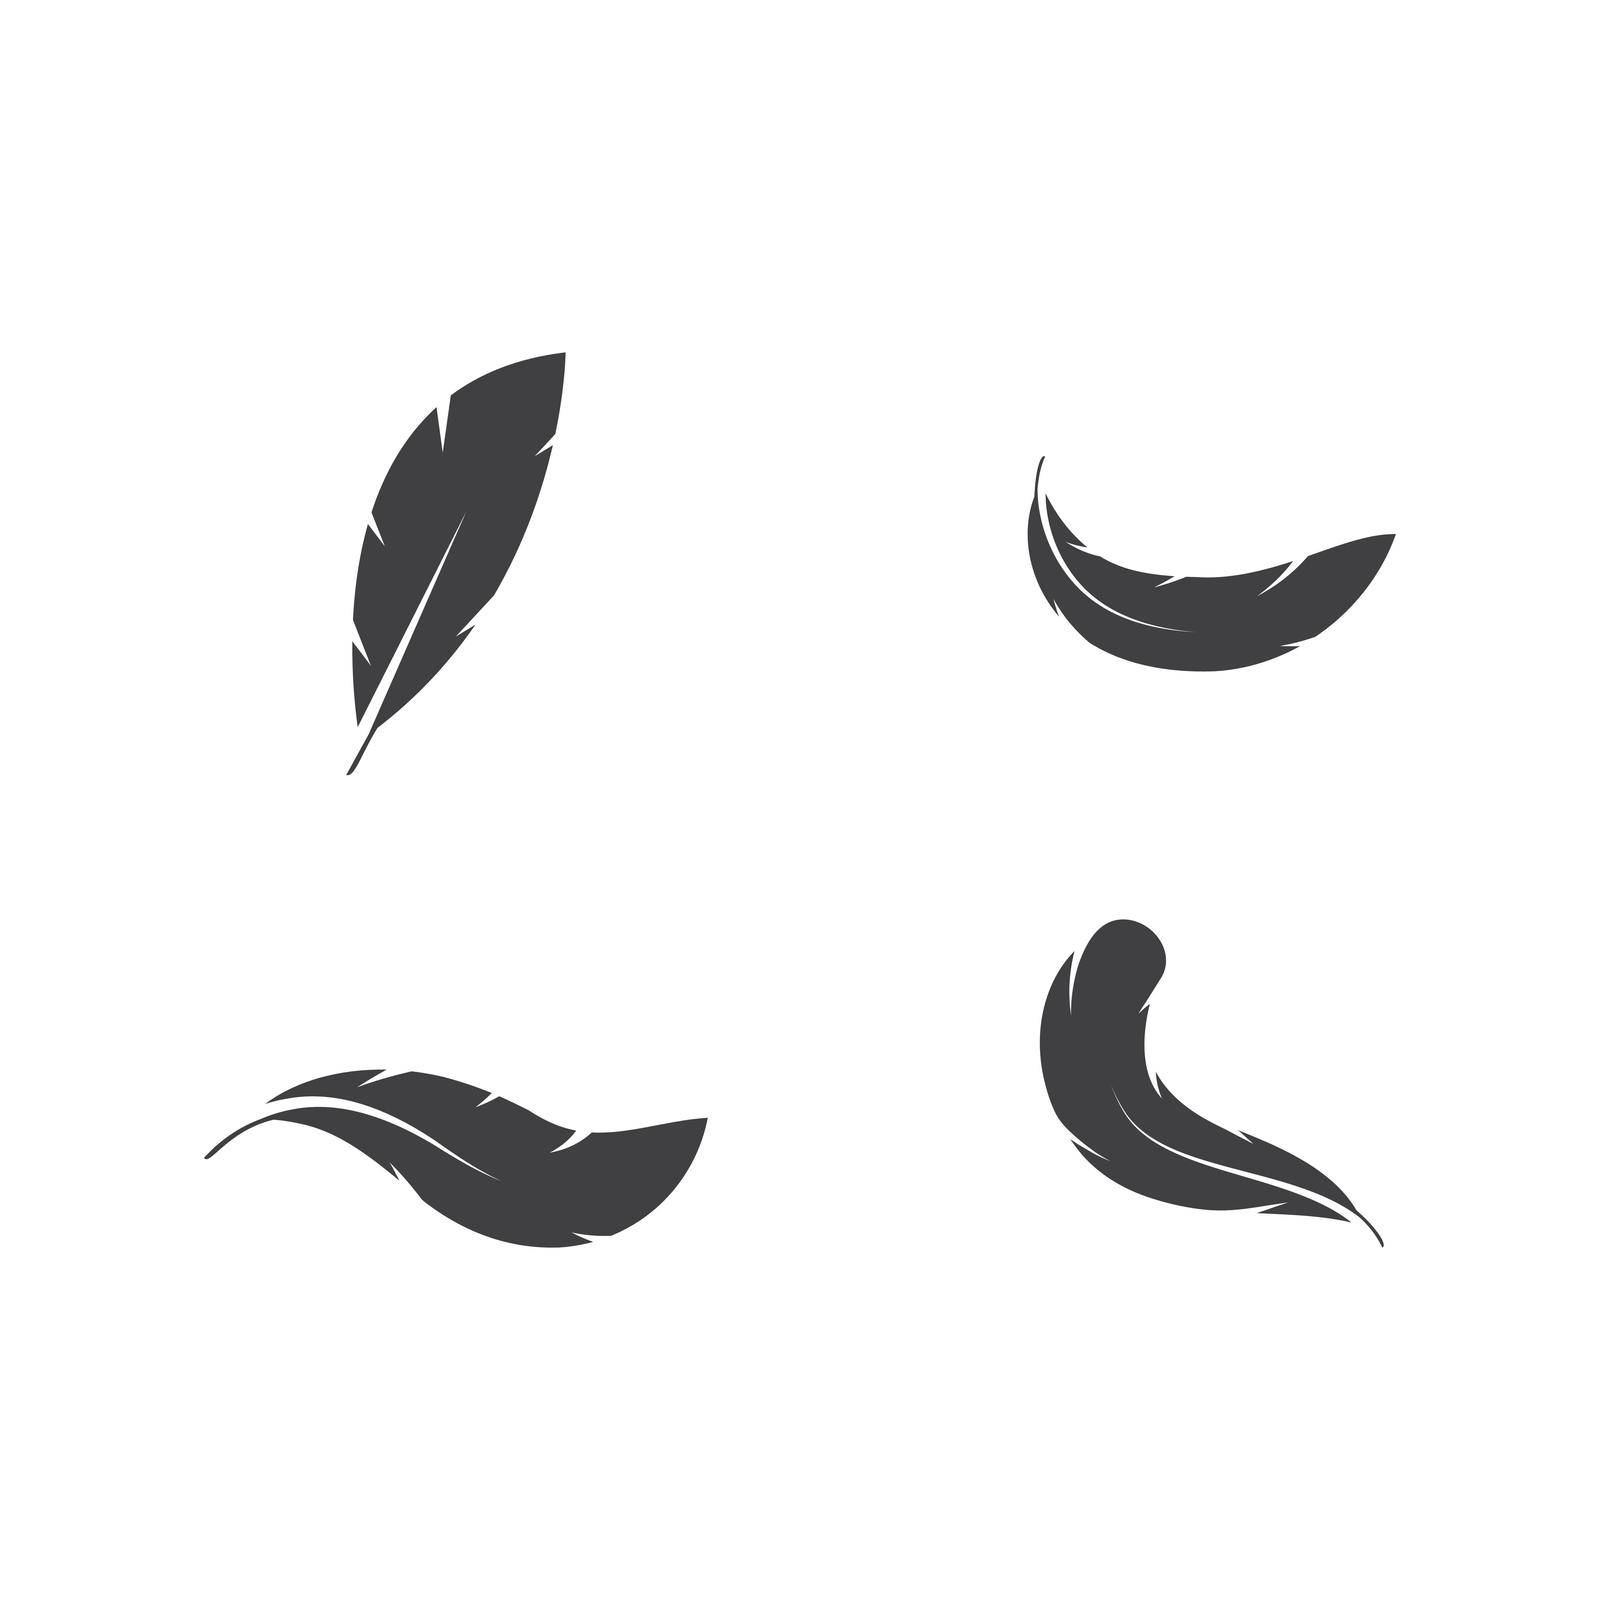 Feather ilustration logo vector by awk